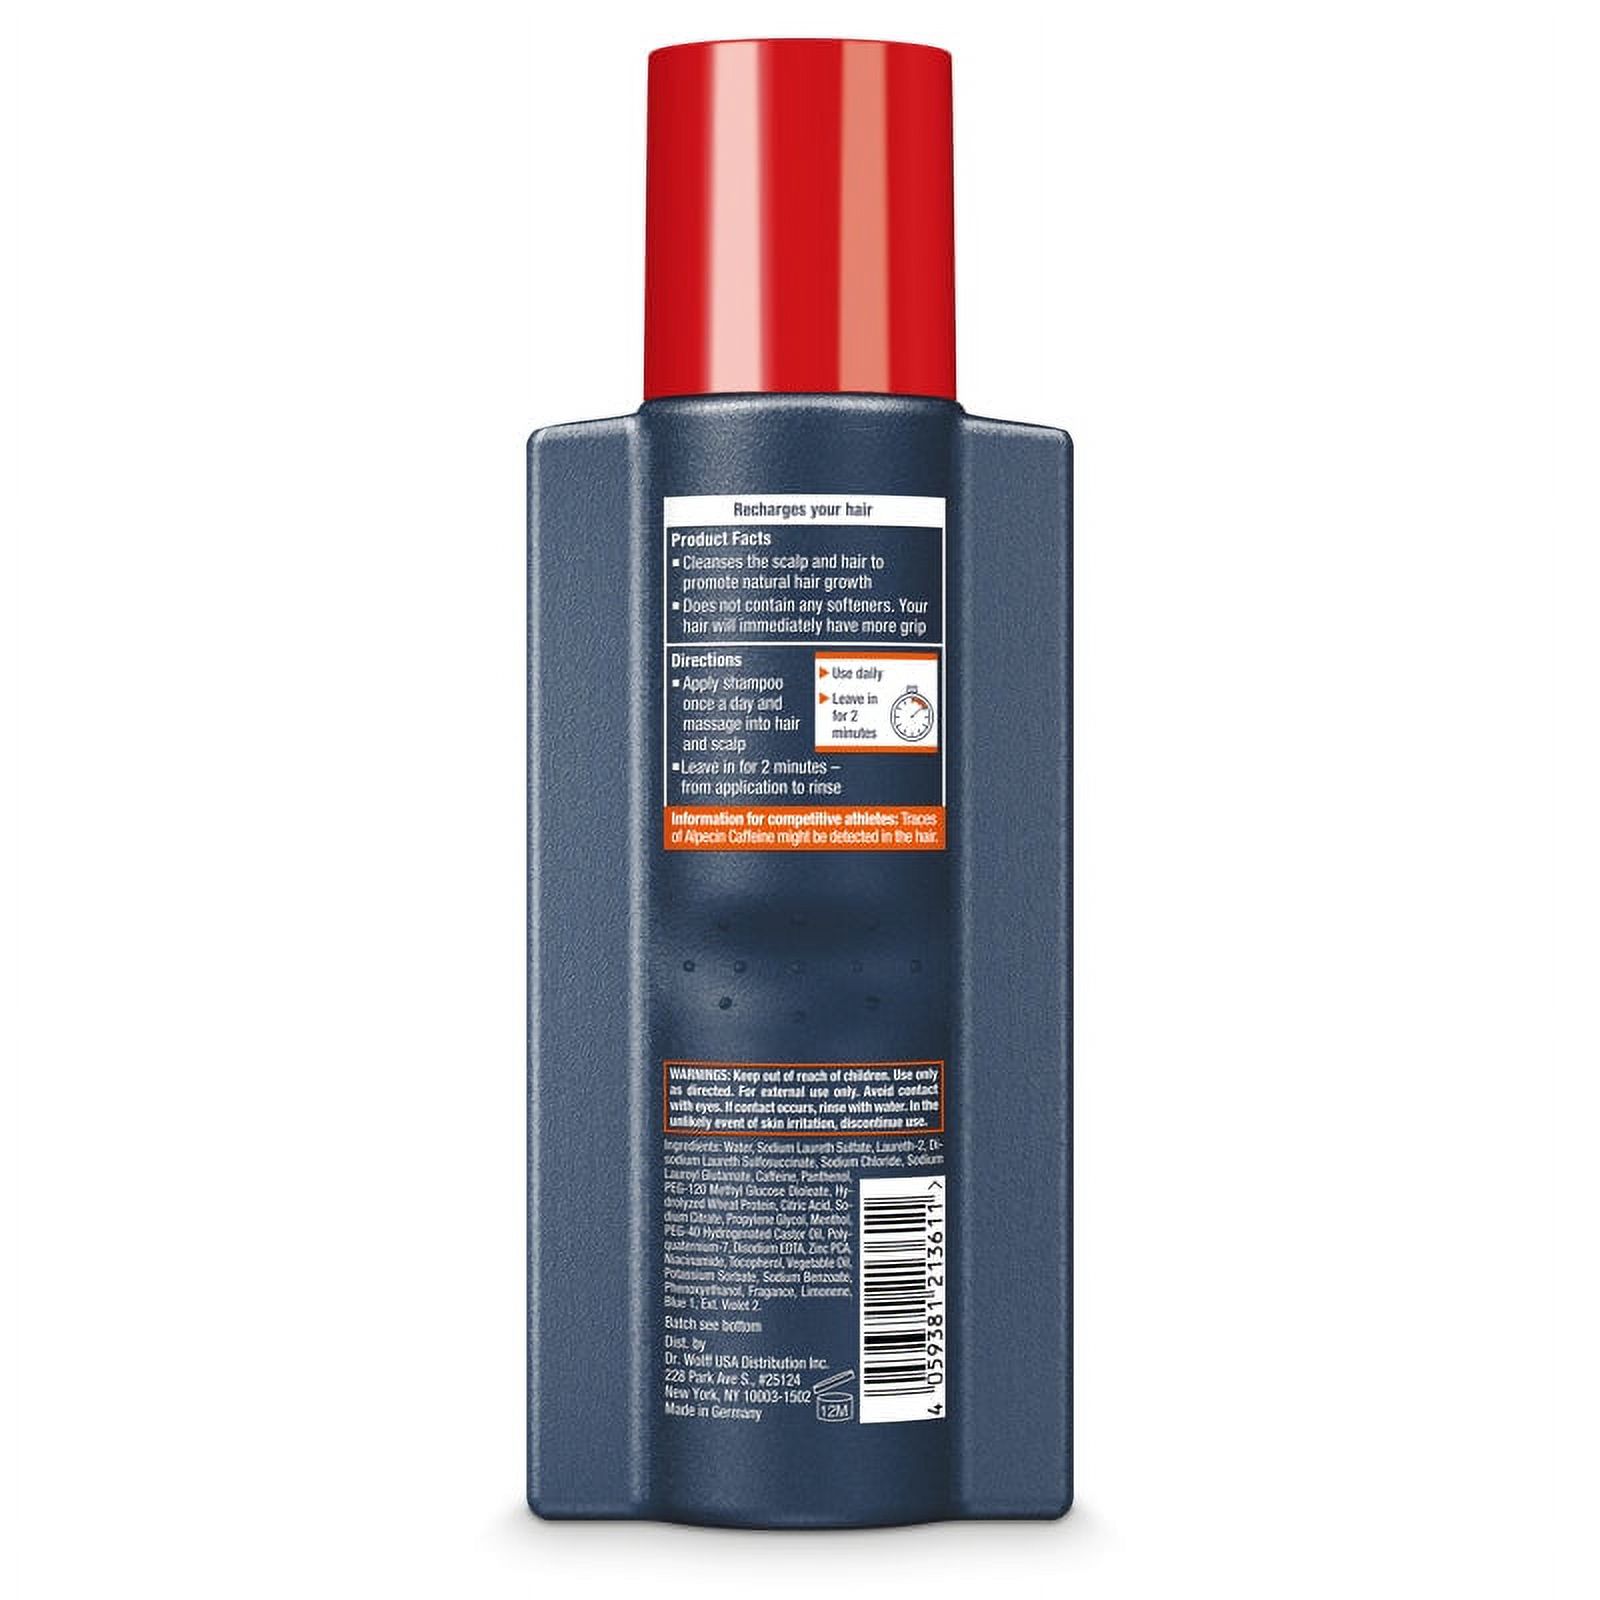 Alpecin Caffeine Shampoo C1 - Cleanses the Scalp to Promote Natural Hair Growth - image 2 of 5